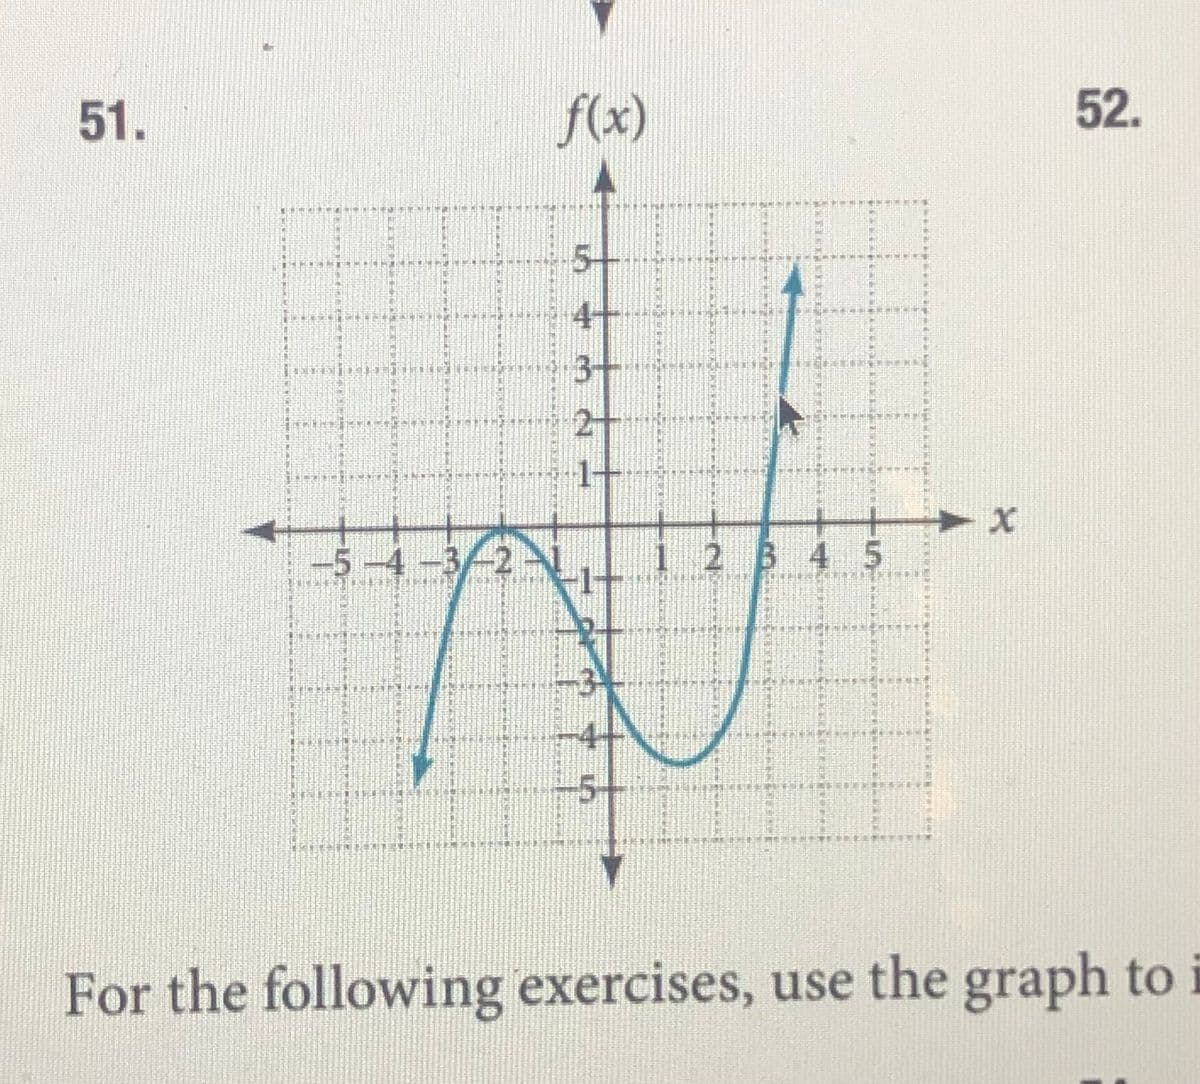 51.
f(x)
52.
5+
4+
3-
-5-4-3-
54-3/2
1 2 B 4 5
For the following exercises, use the graph to
